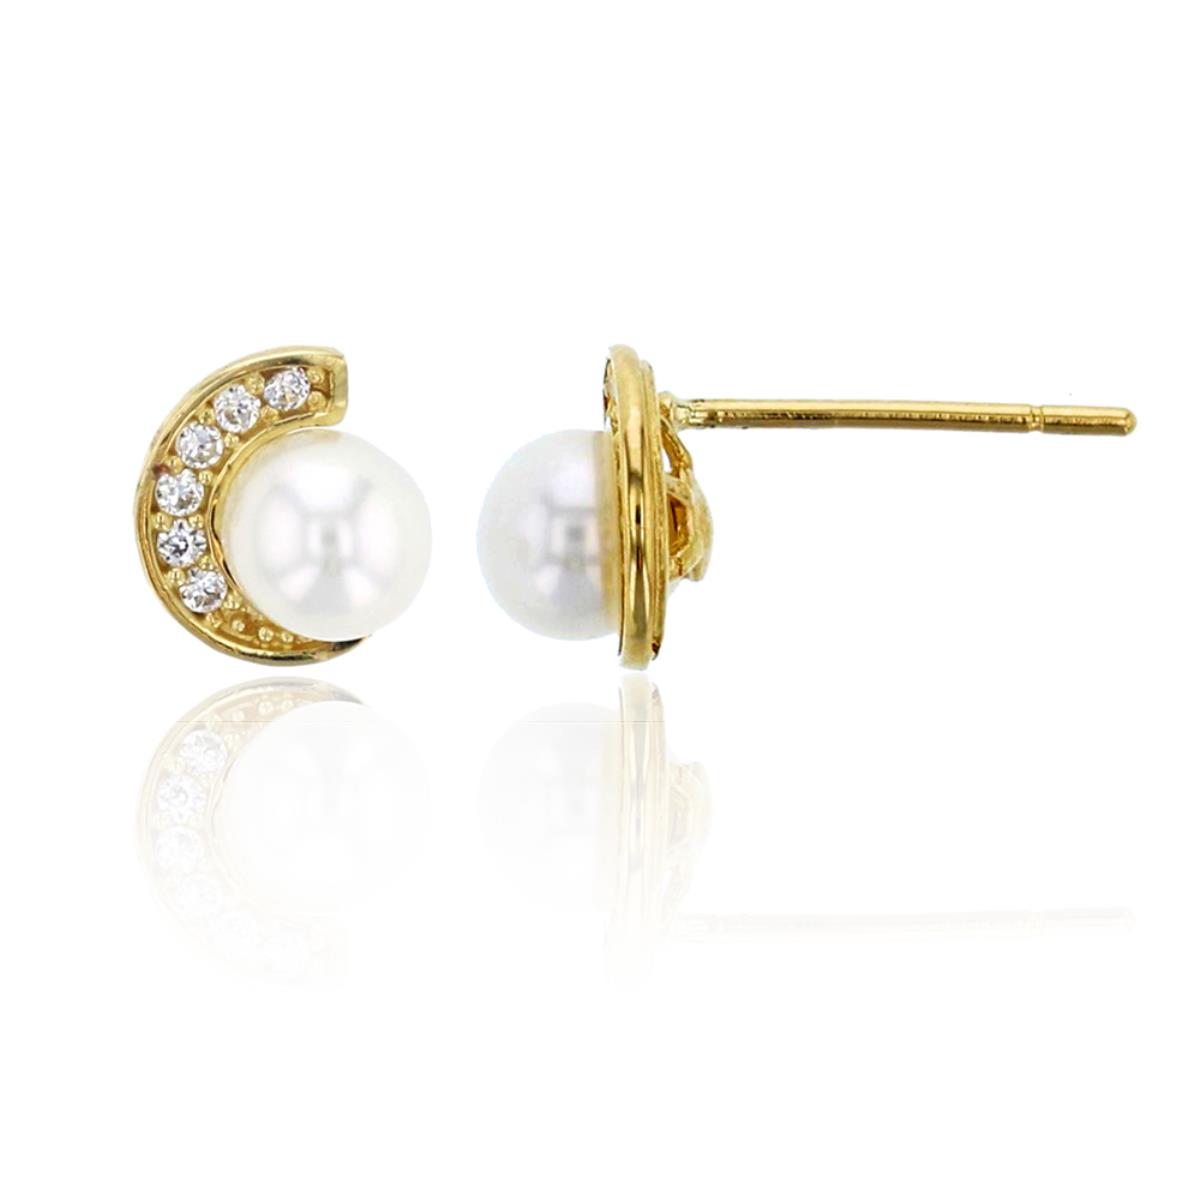 14K Yellow Gold Pave 4mm Fresh Water Pearl & CZ Moon Stud Earring